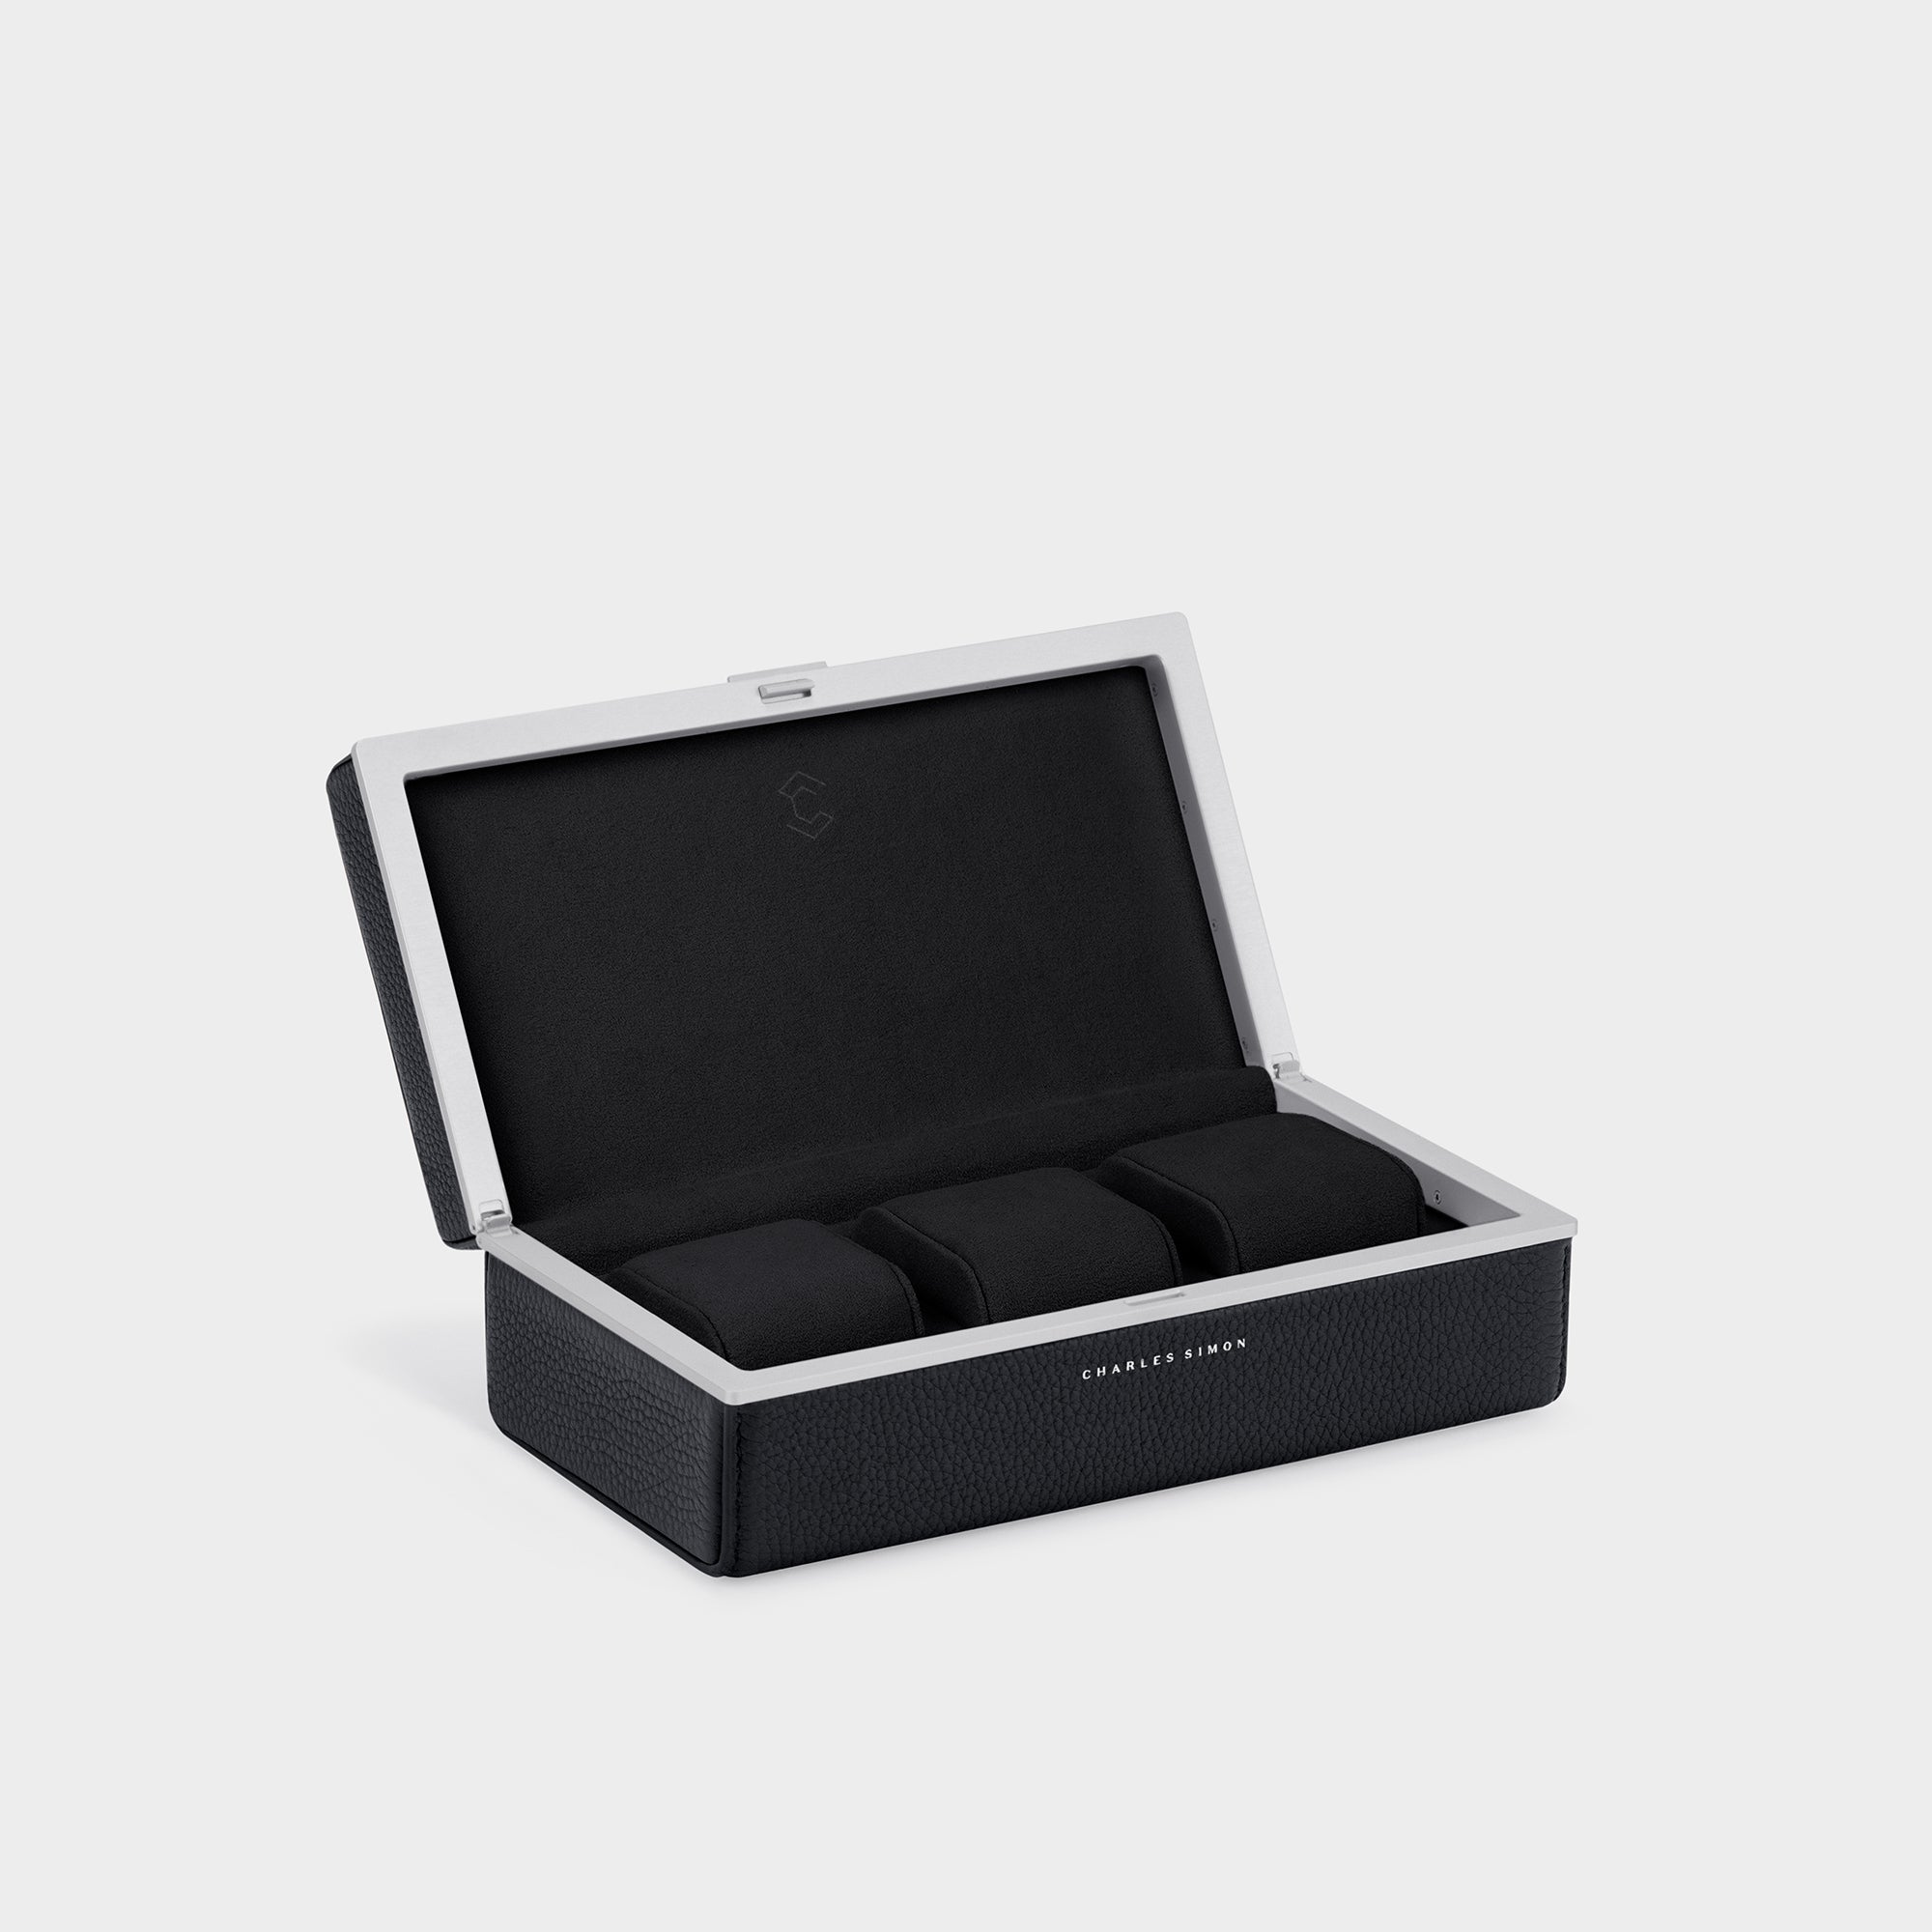 Charles Simon Eaton 3 watch case in black leather and grey anodized aluminum